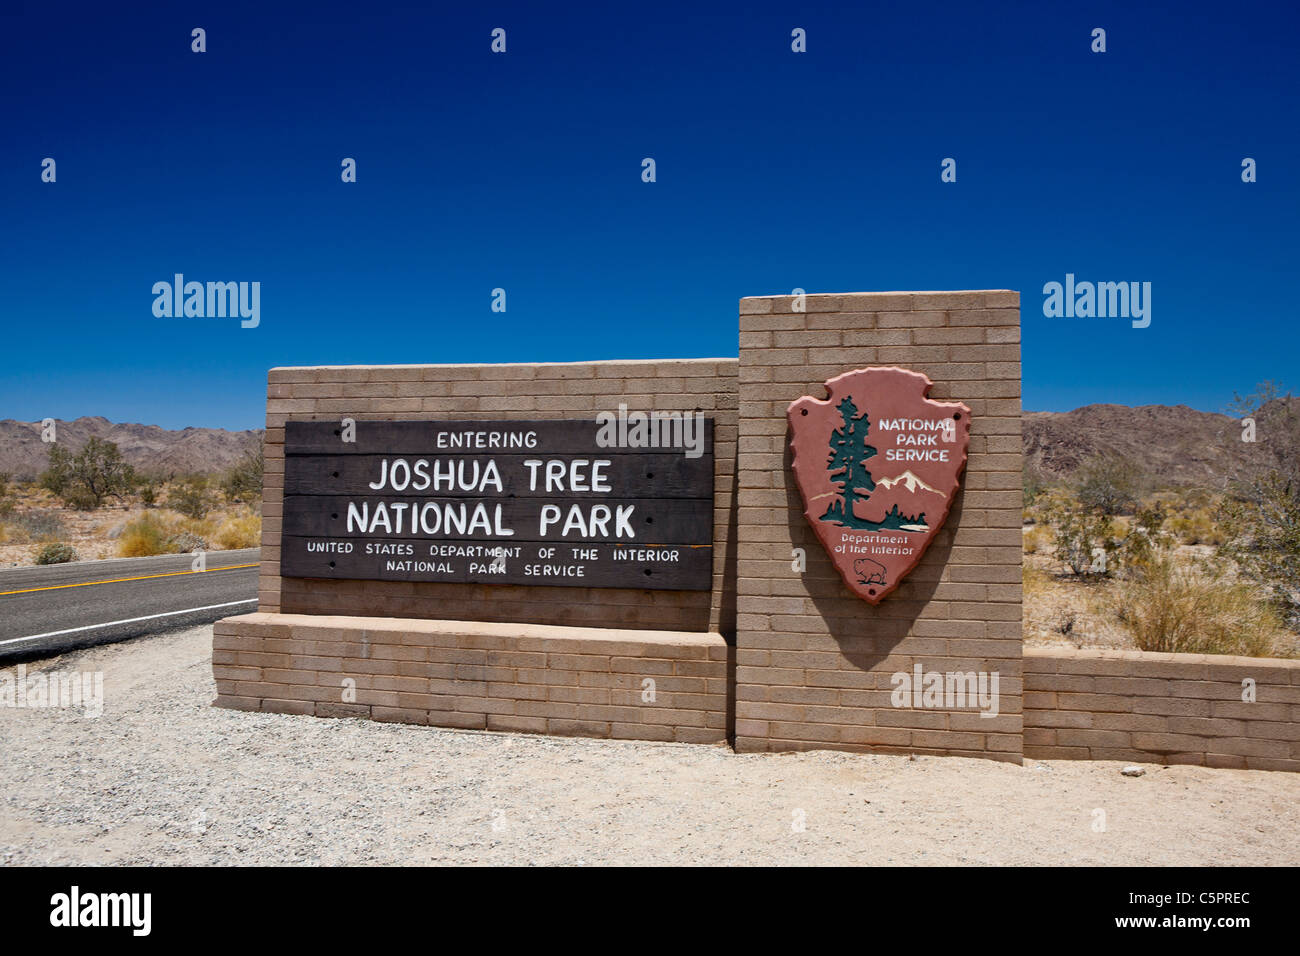 National Park Service welcome sign to Joshua Tree National Park, California, United States of America Stock Photo